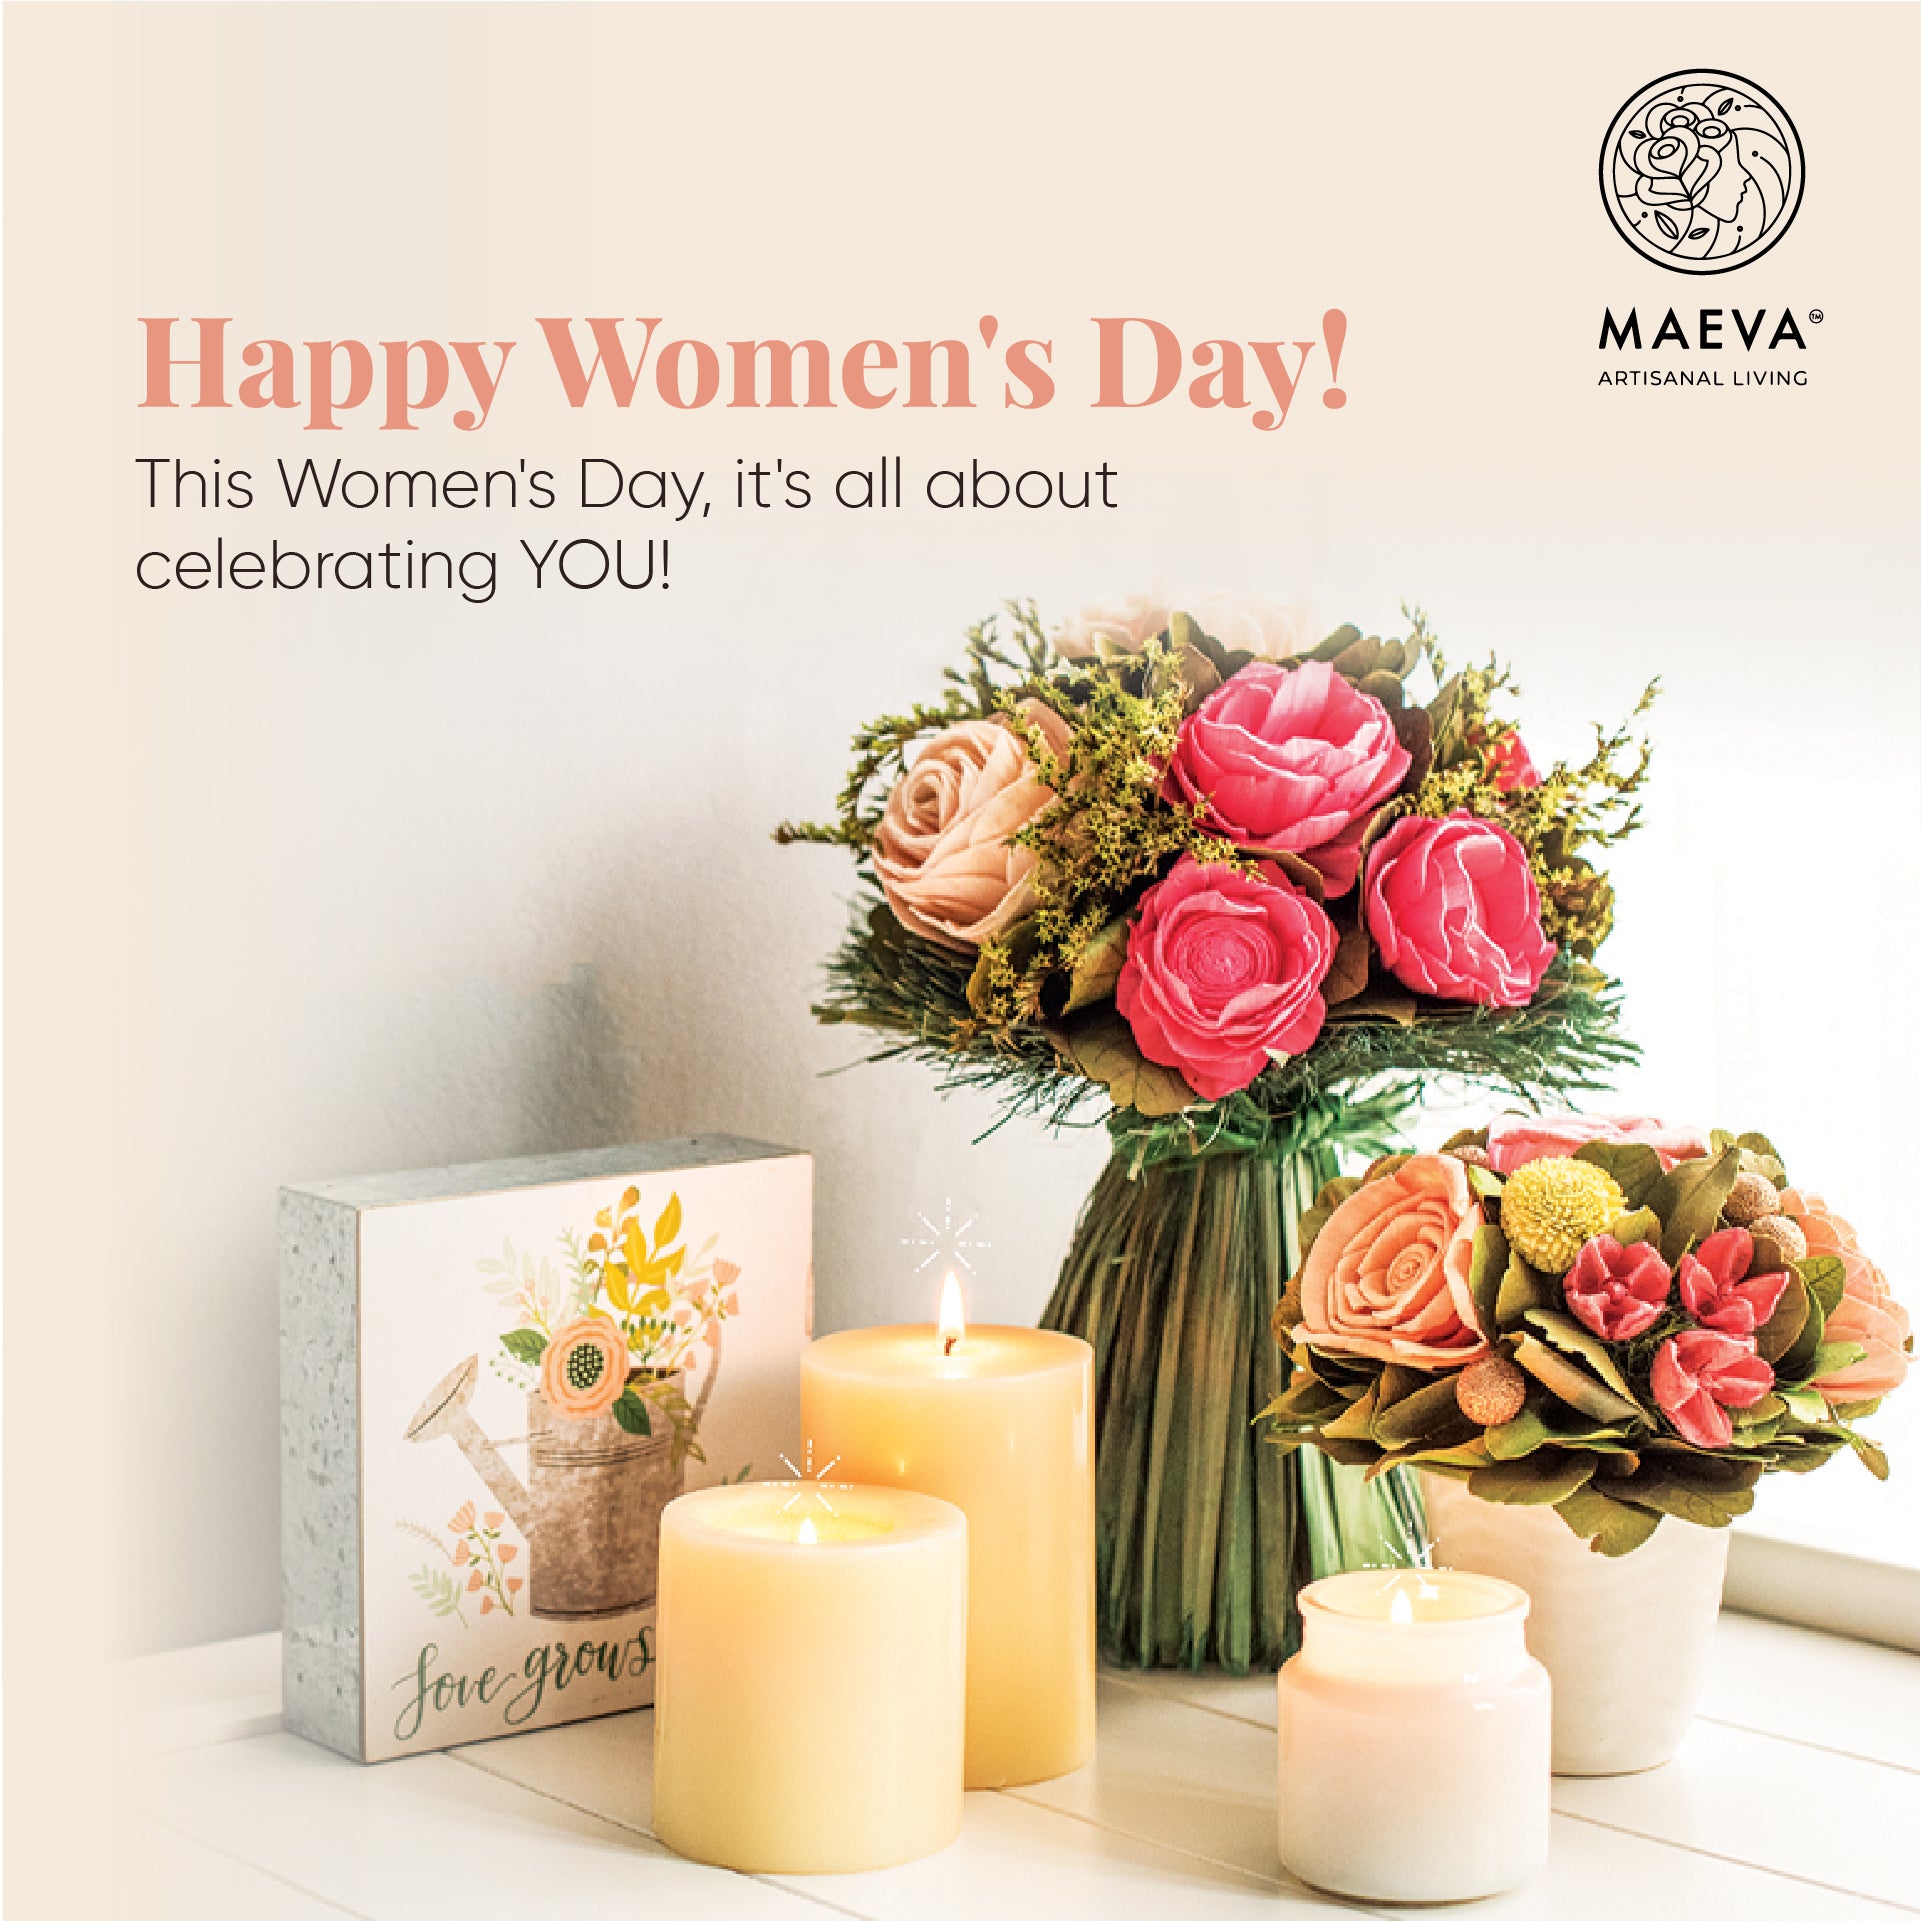 Empowered Together: Nurturing Sisterhood and Progress this Women's Day with Maeva's Thoughtful Gifts